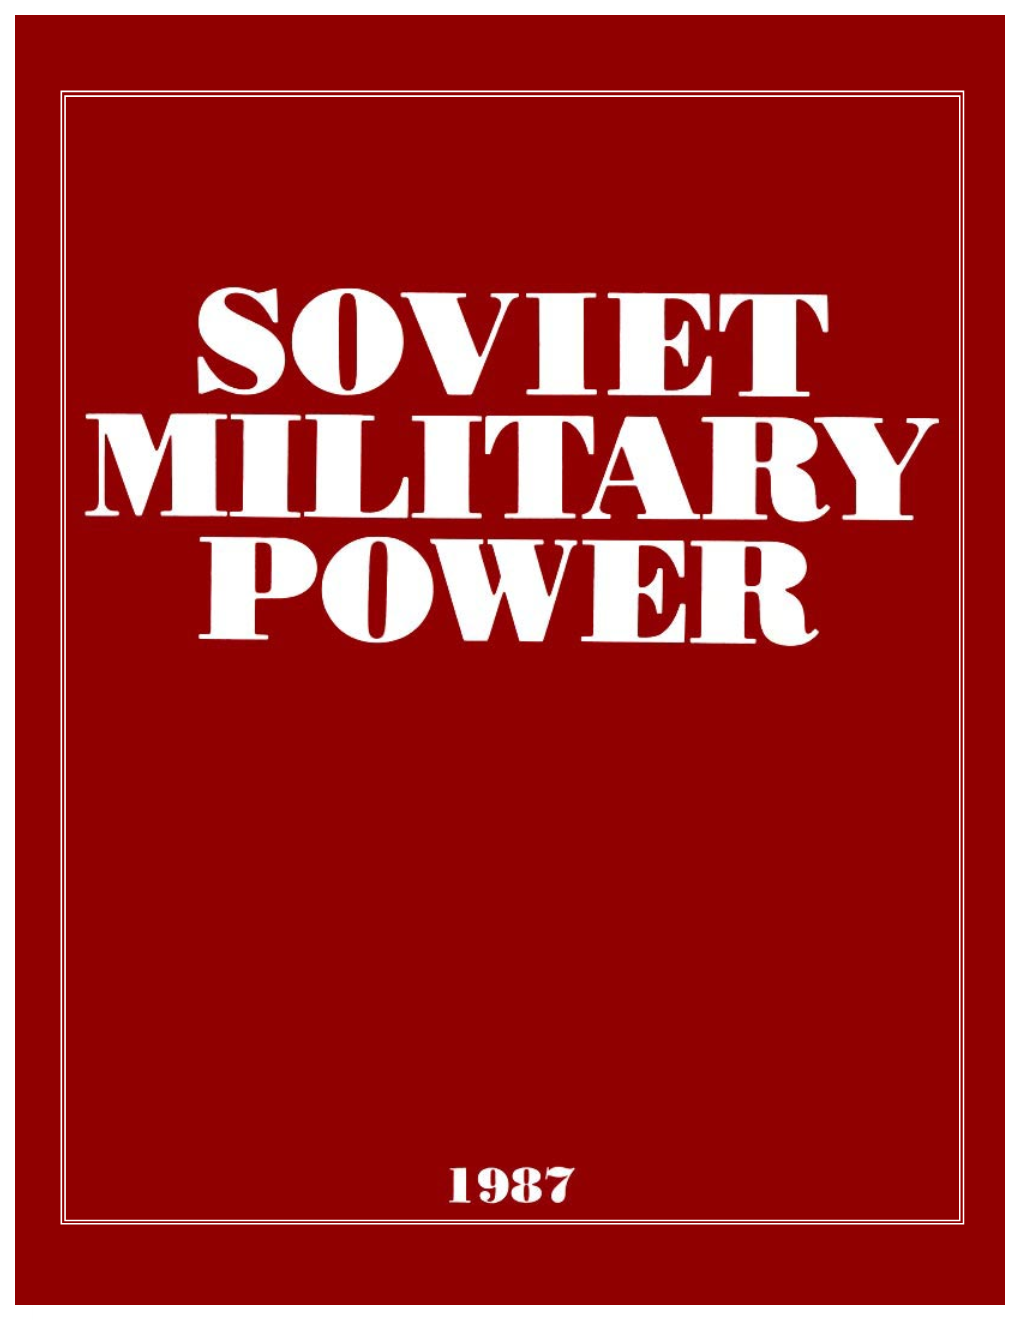 Soviet Military Power 1987 Reviews New Developments in the USSR’S Armed Forces Over the Past Year and Places These in the Context of Current Doctrine and Strategy